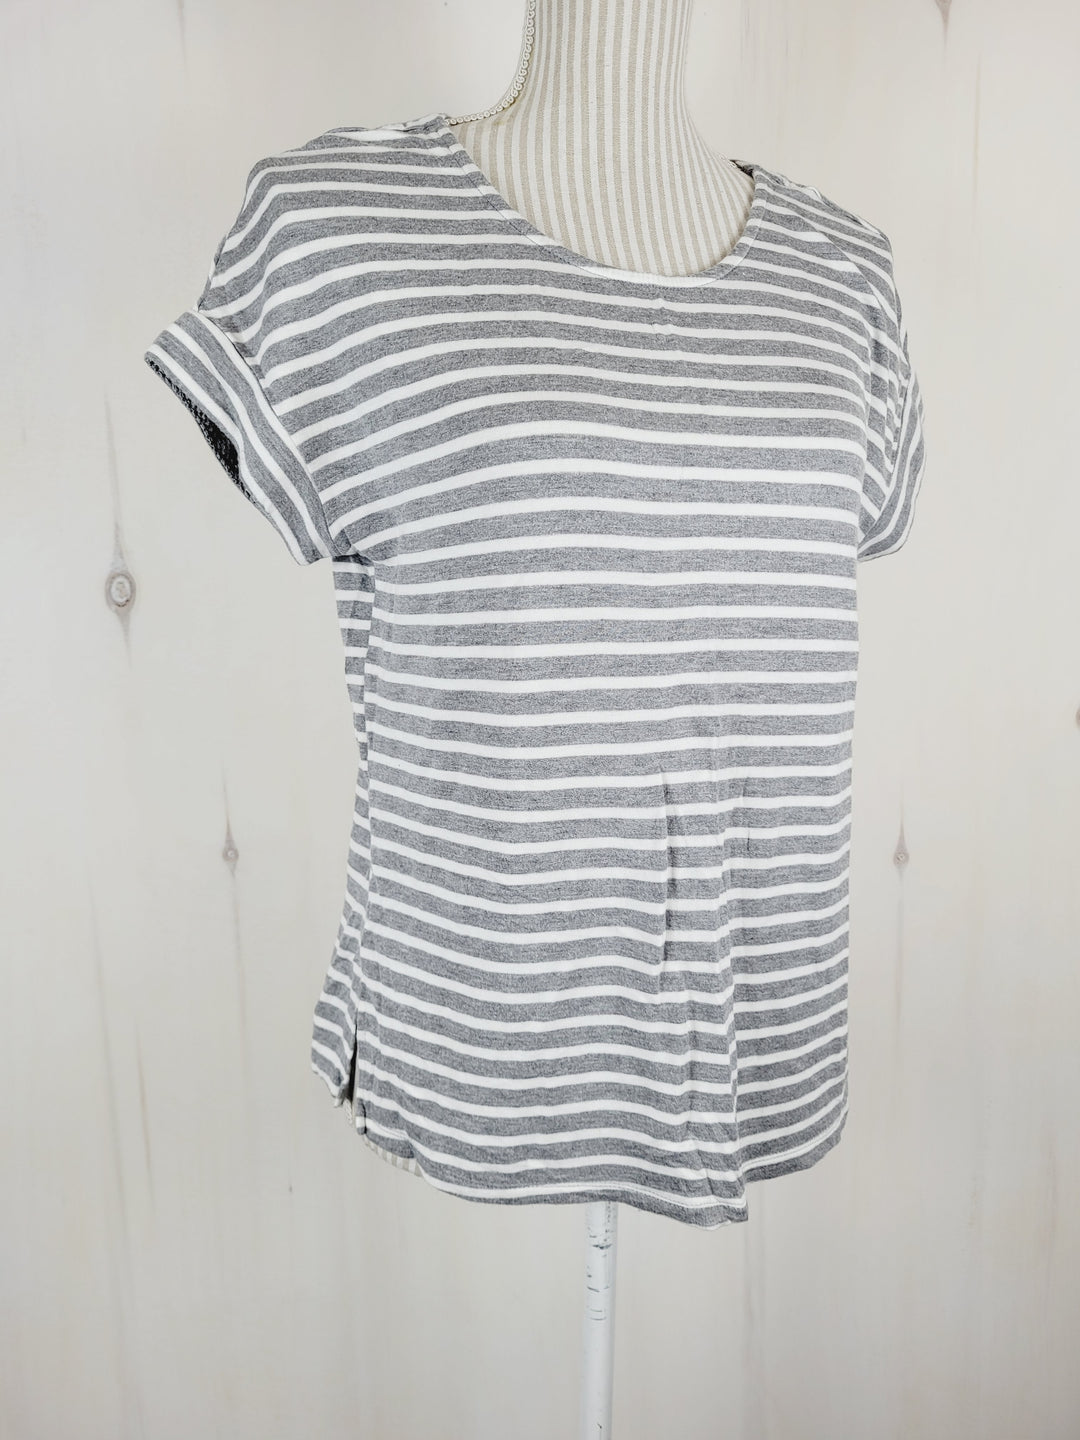 SOFT STRETCHABLE GREY/WHITE TOP APPROX LADIES SMALL EUC